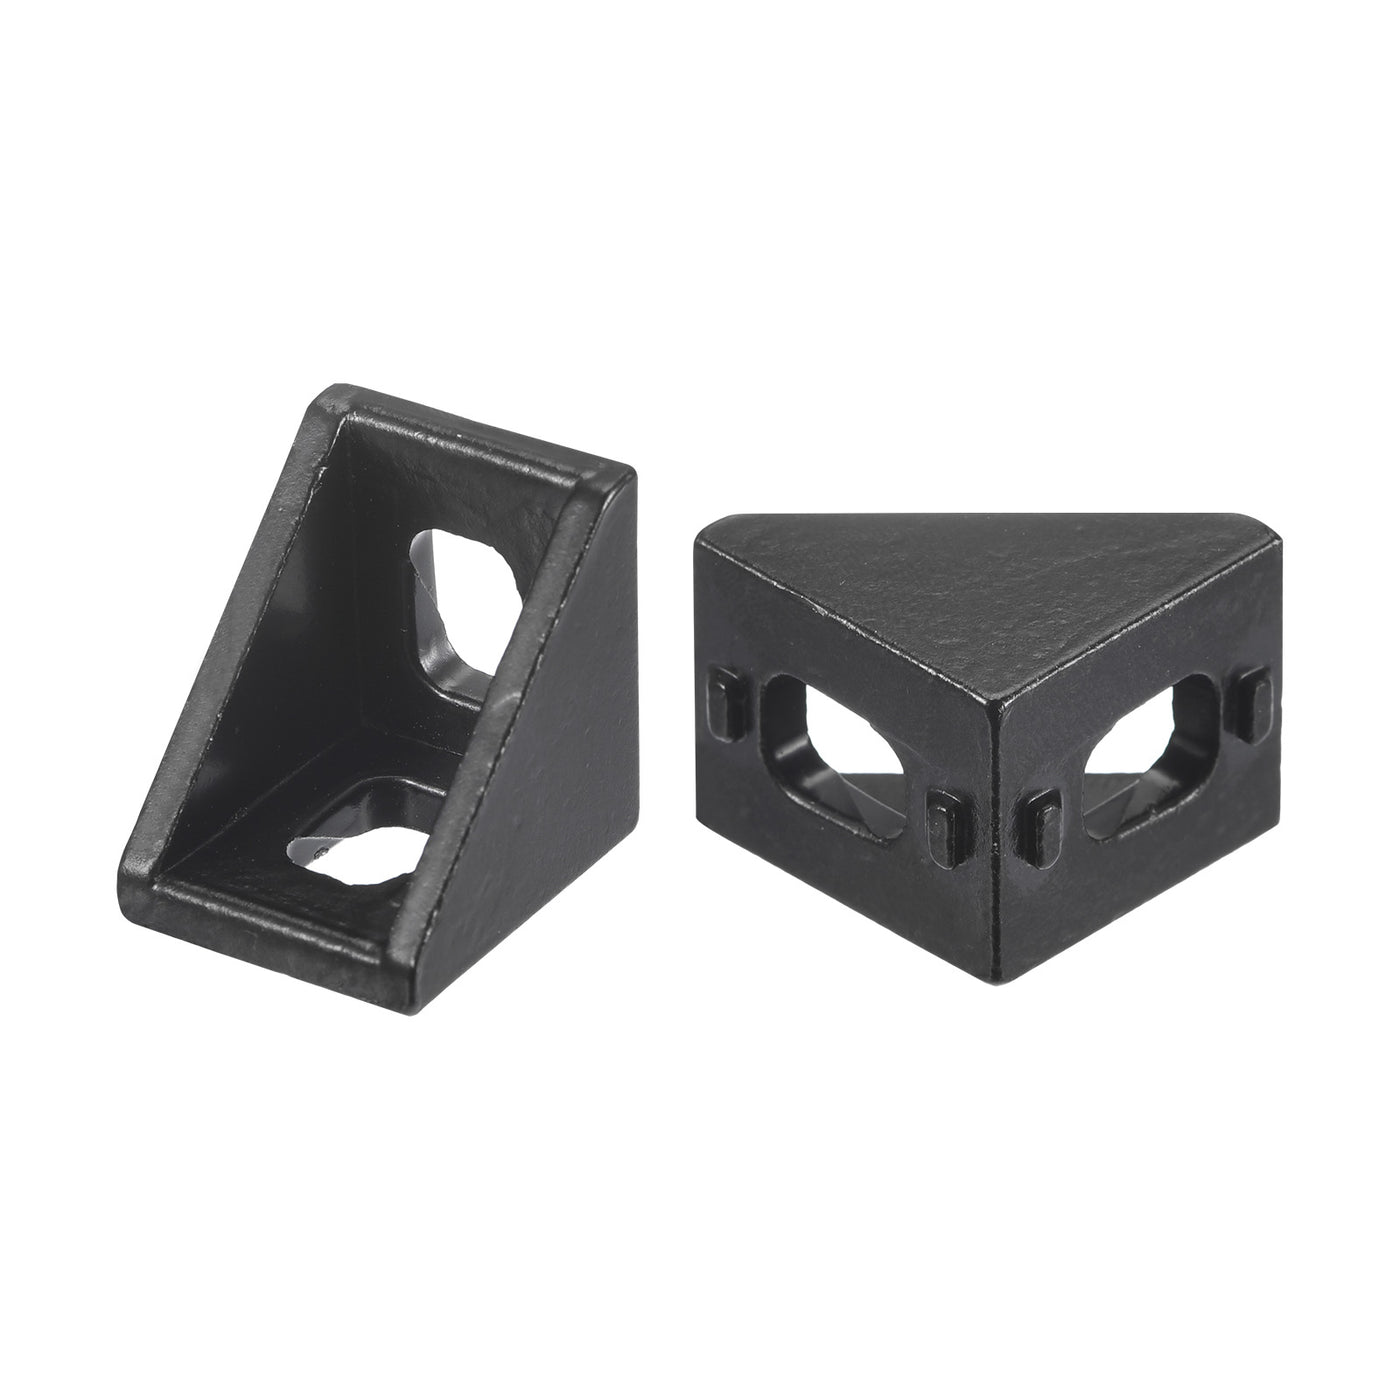 uxcell Uxcell 8Pcs Inside Corner Bracket Gusset, 20x20x17mm 2020 Angle Connectors for 2020 Series Aluminum Extrusion Profile Black